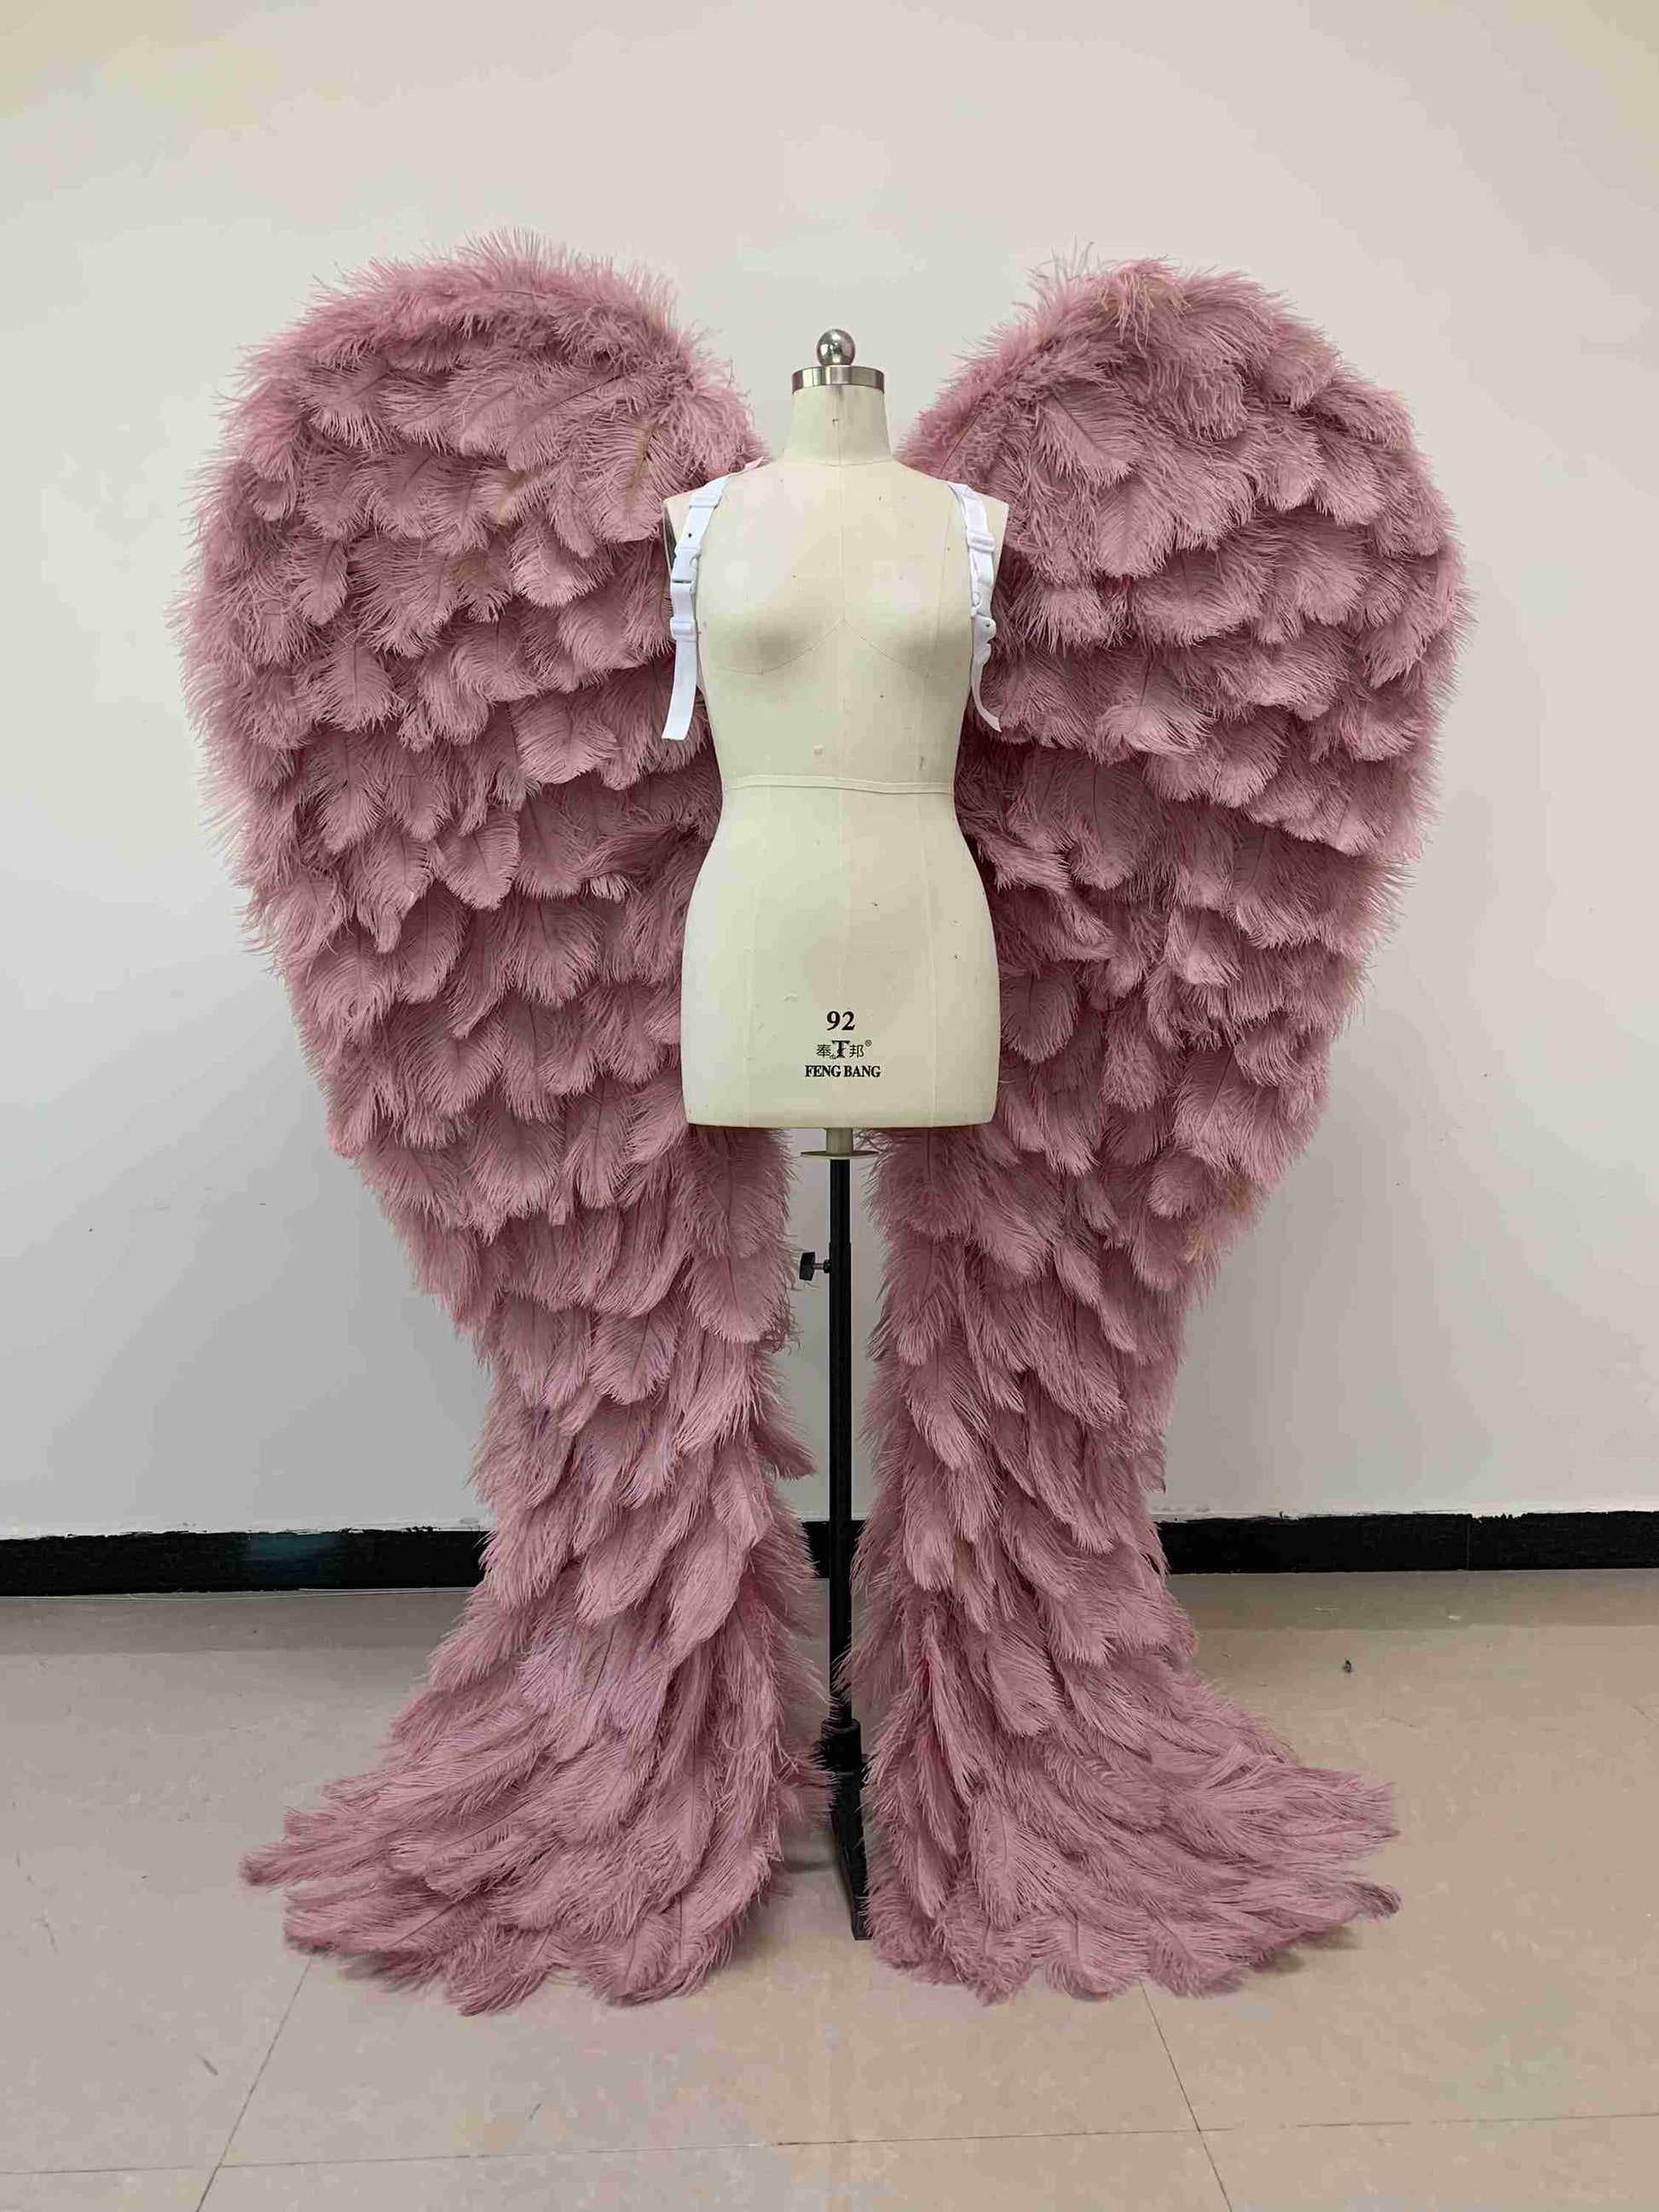 Our luxury purple angel wings from the front. Made from ostrich feathers. Wings for angel costume. Suitable for photoshoots especially for boudoirs.